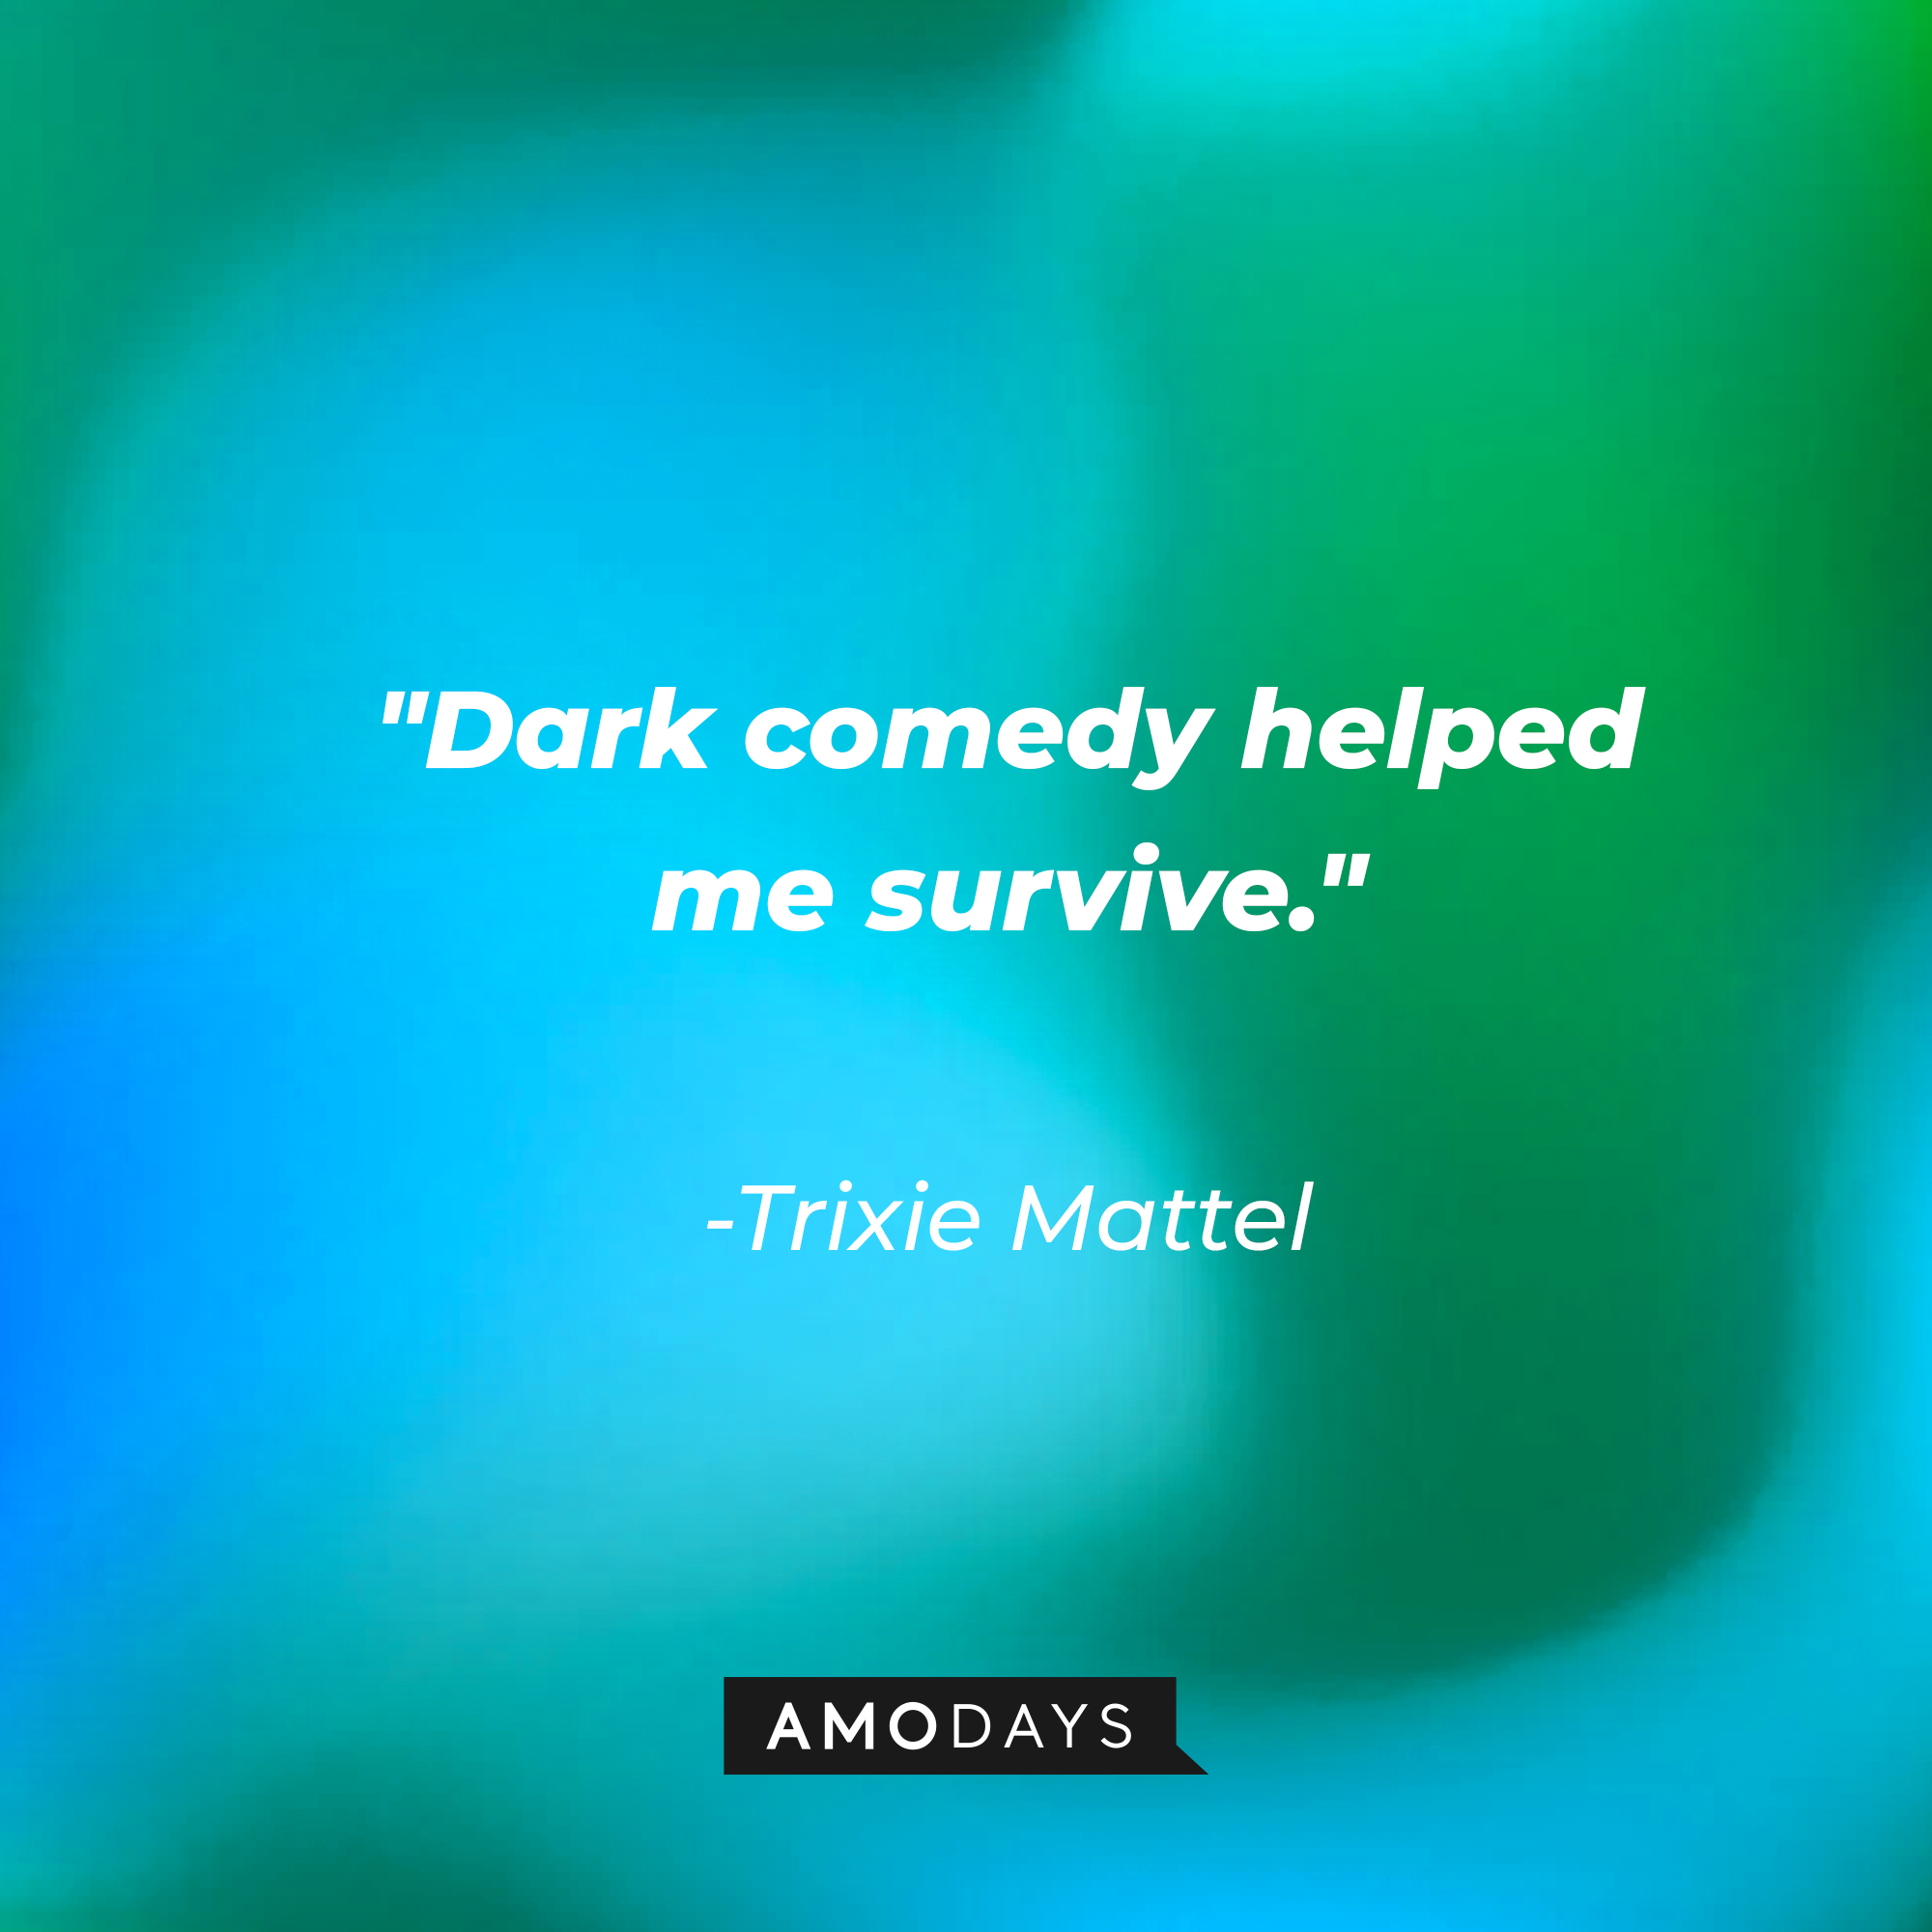 Trixie Mattel's quote: "Dark comedy helped me survive." | Source: AmoDays